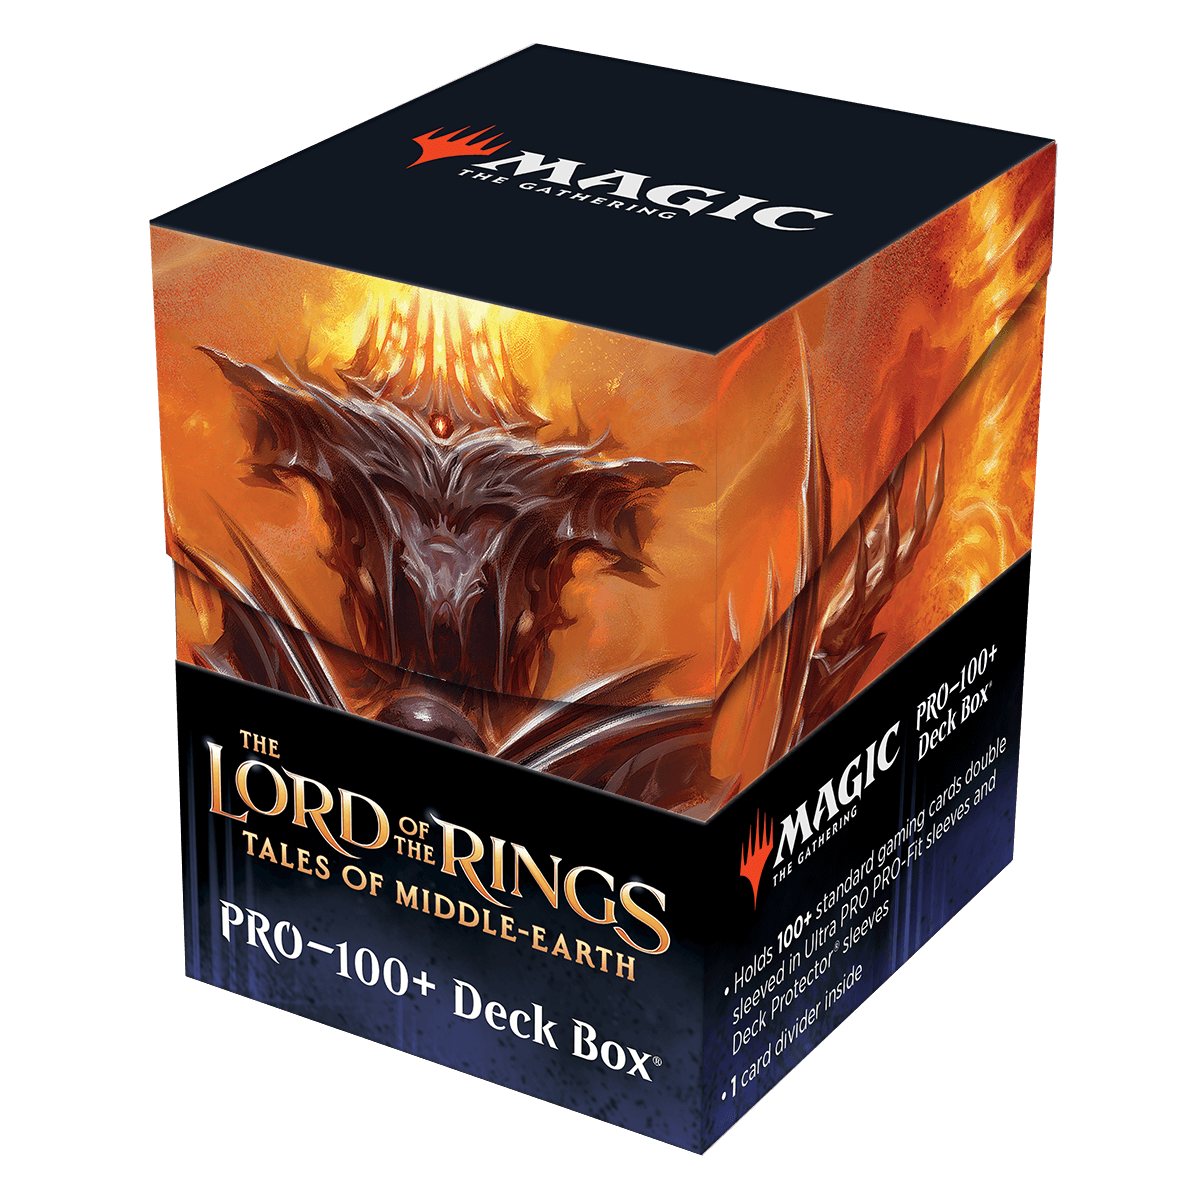 Ultra PRO: 100+ Deck Box - The Lord of the Rings (Sauron, the Dark Lord)